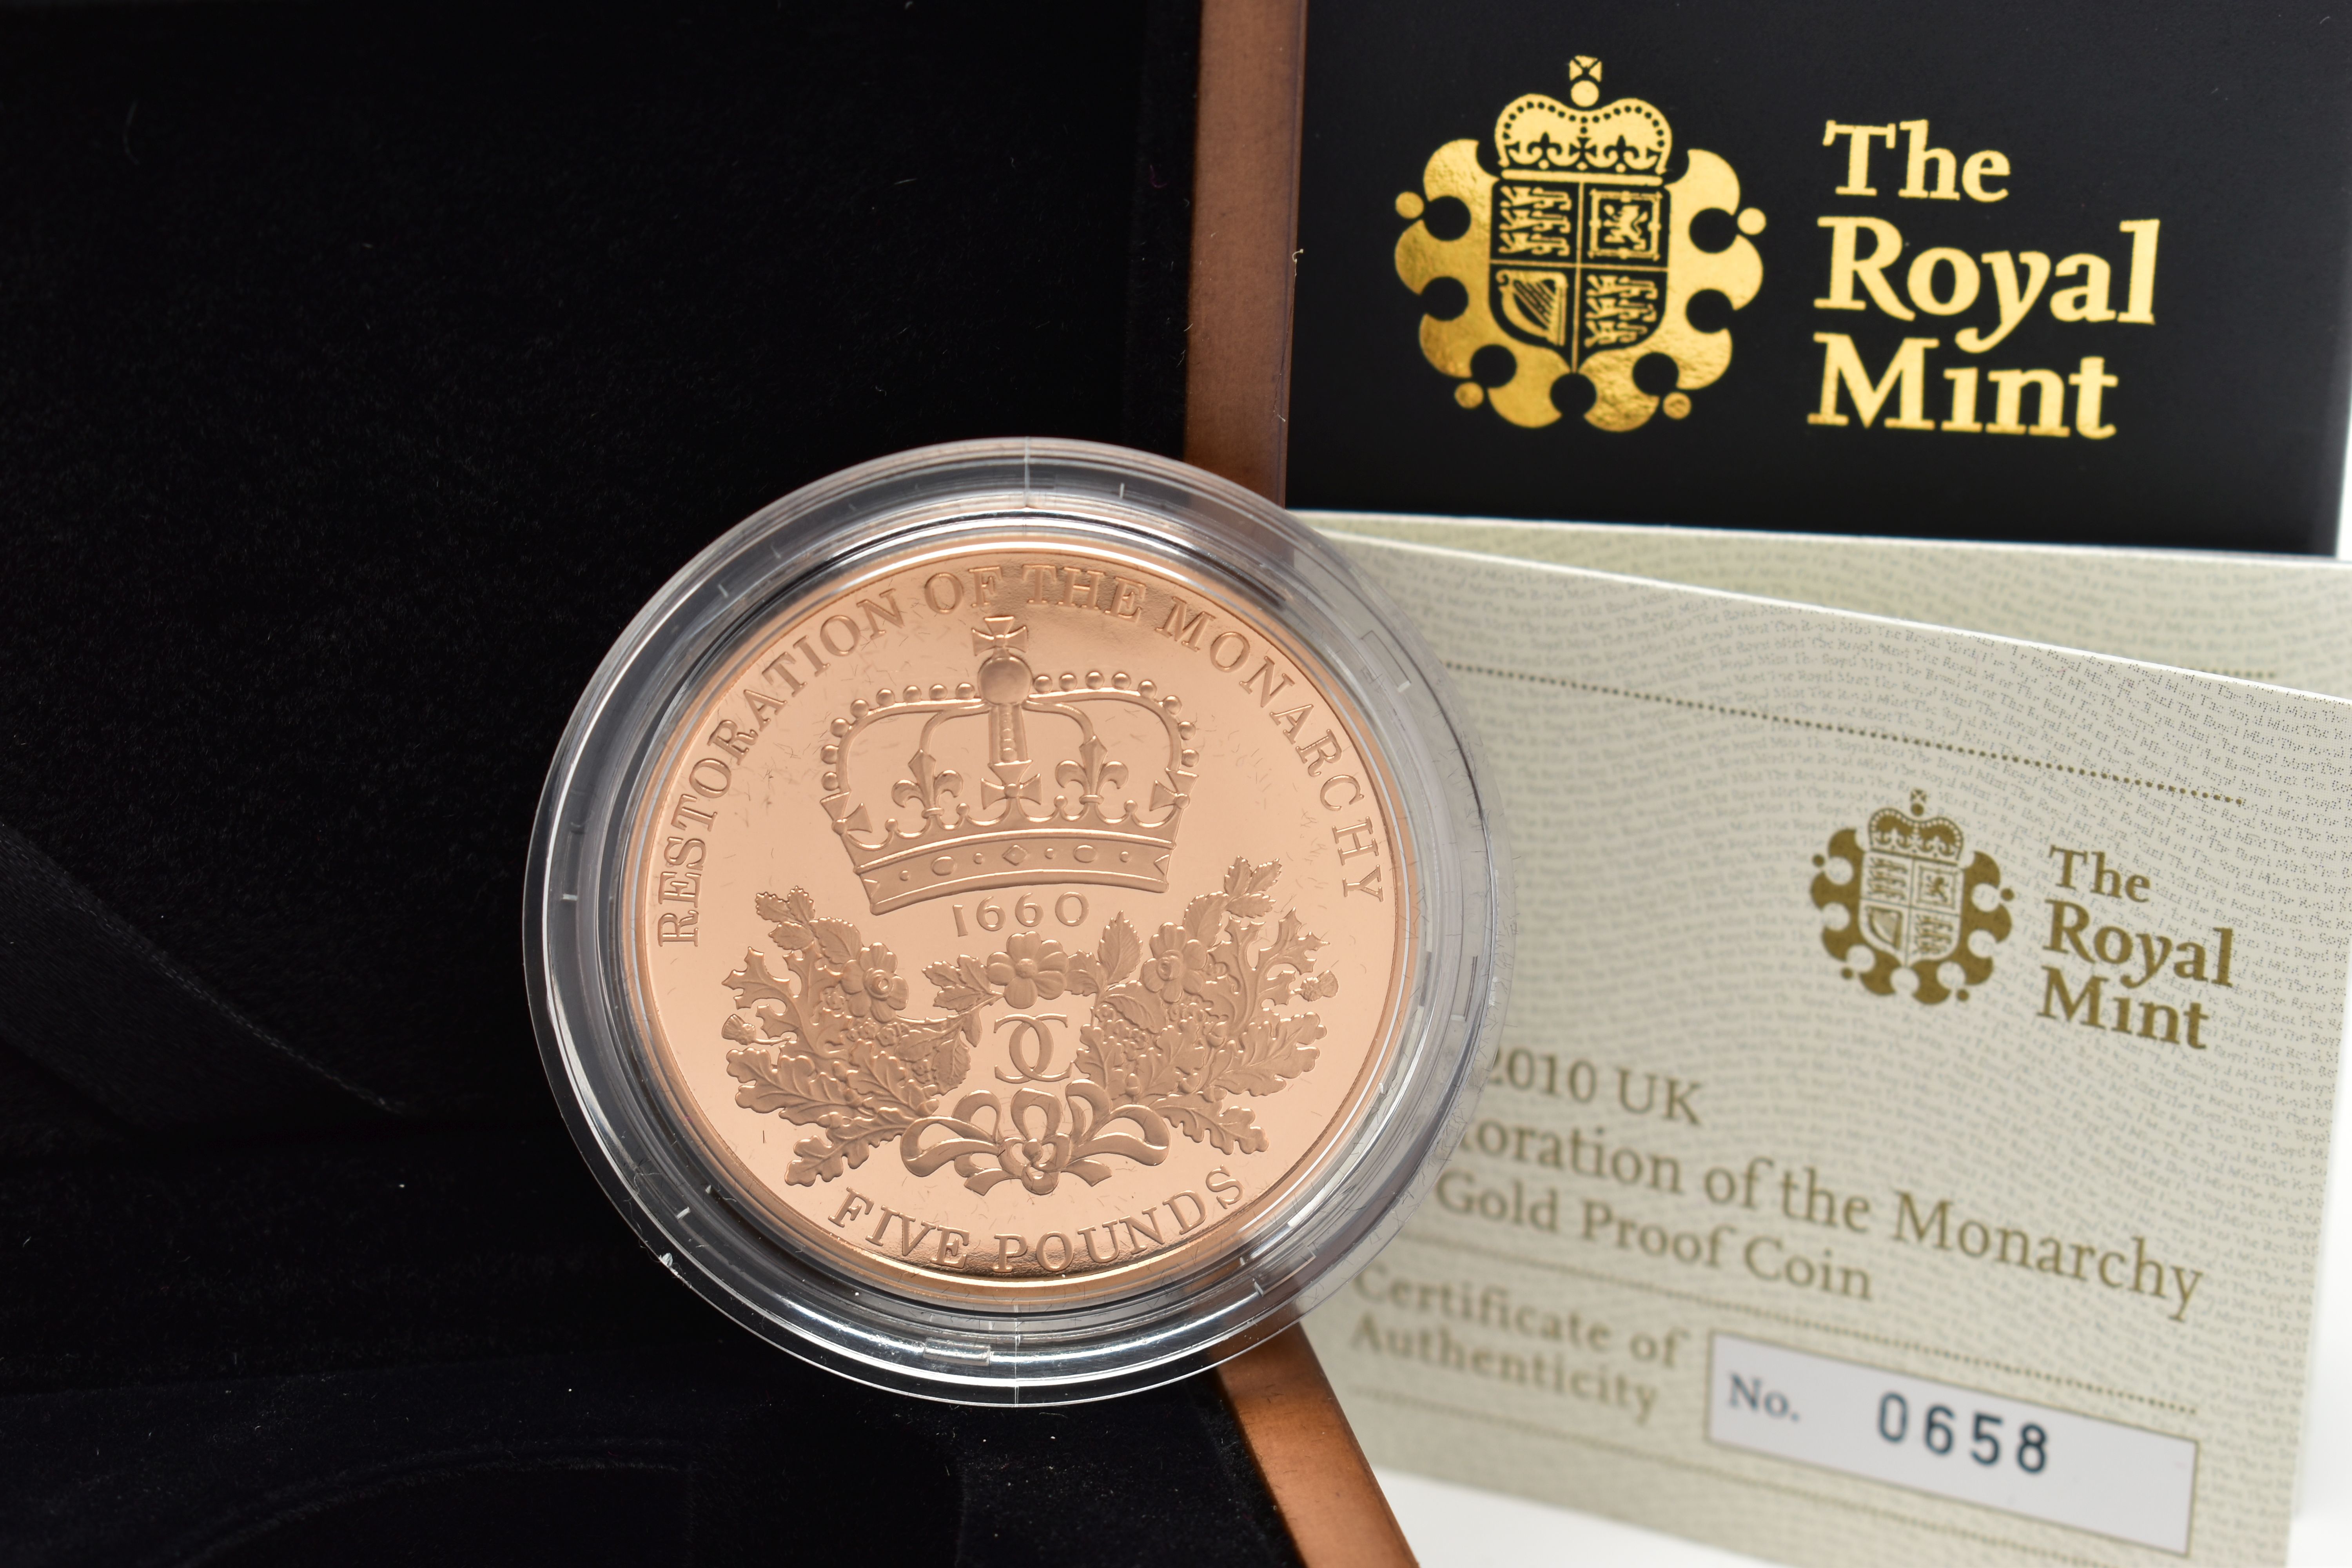 A ROYAL MINT 2010 UNITED KINGDOM GOLD PROOF £5 COIN, 39.94 grams, 38.61mm, obverse depicting Queen